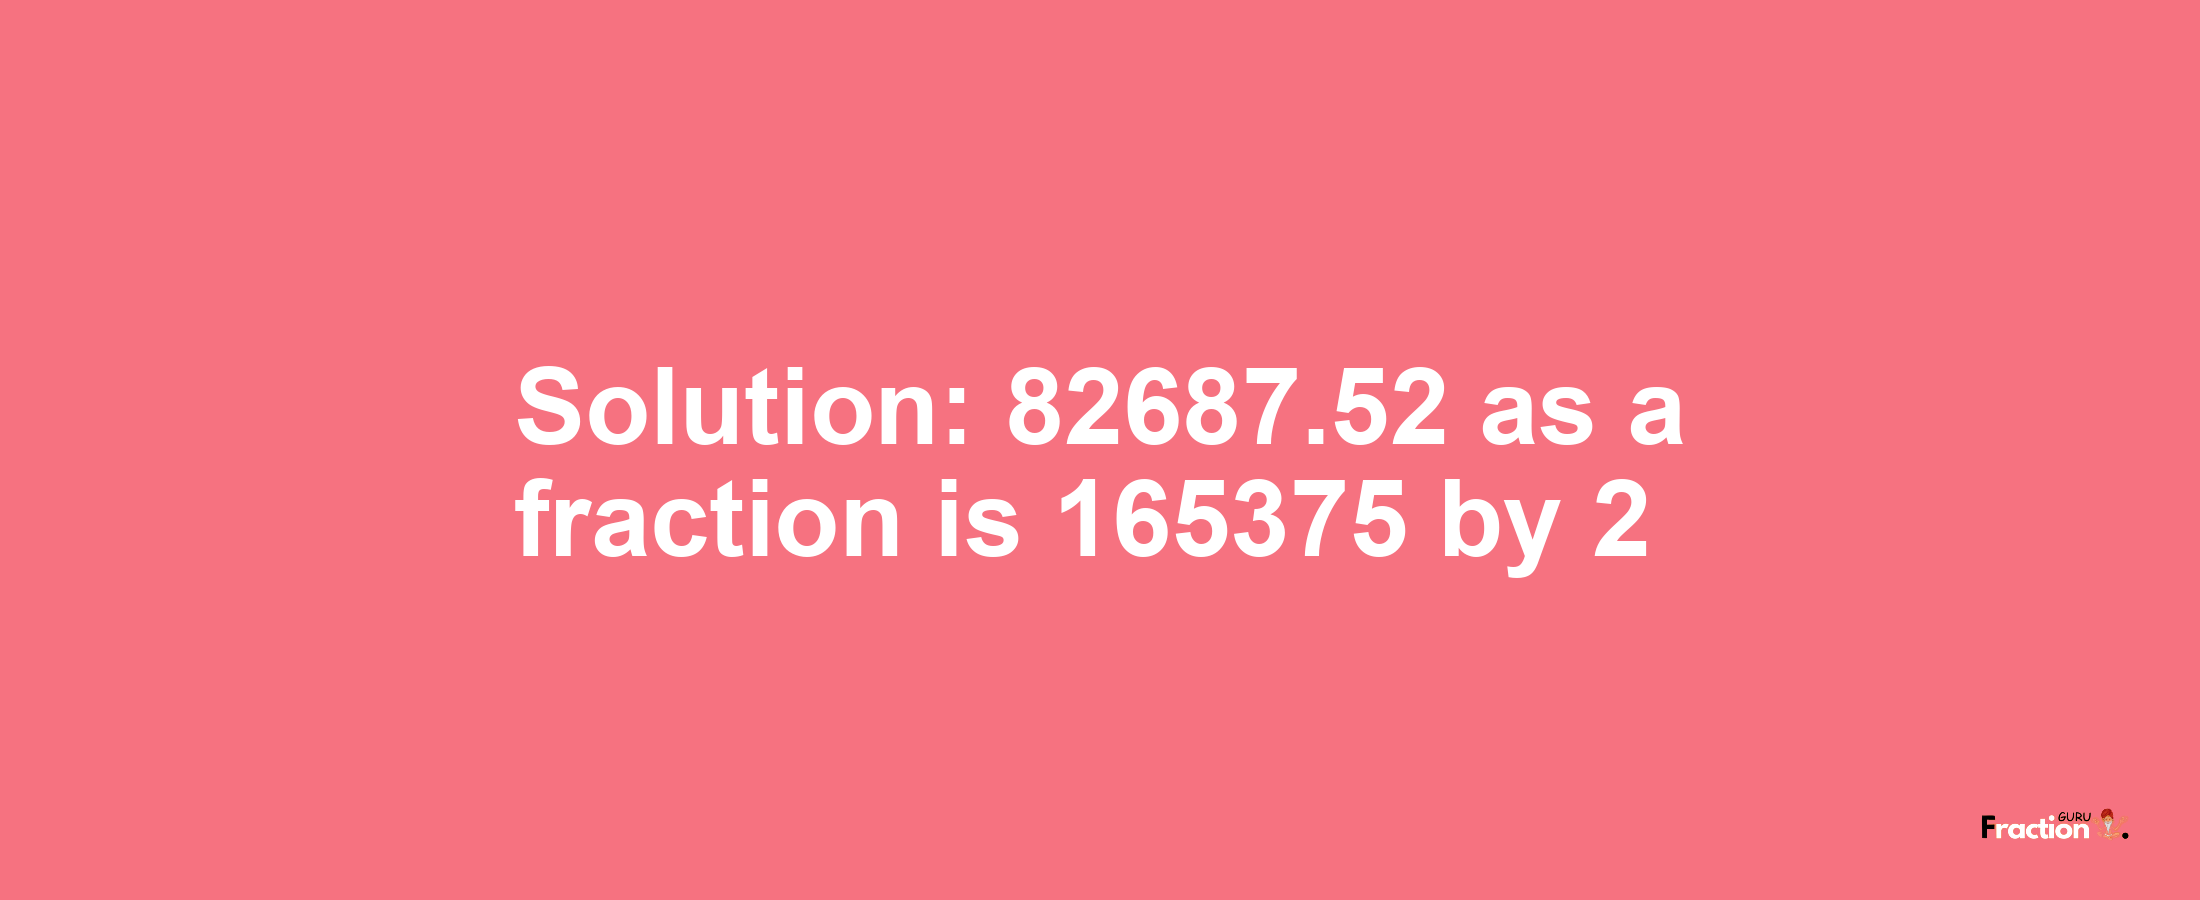 Solution:82687.52 as a fraction is 165375/2